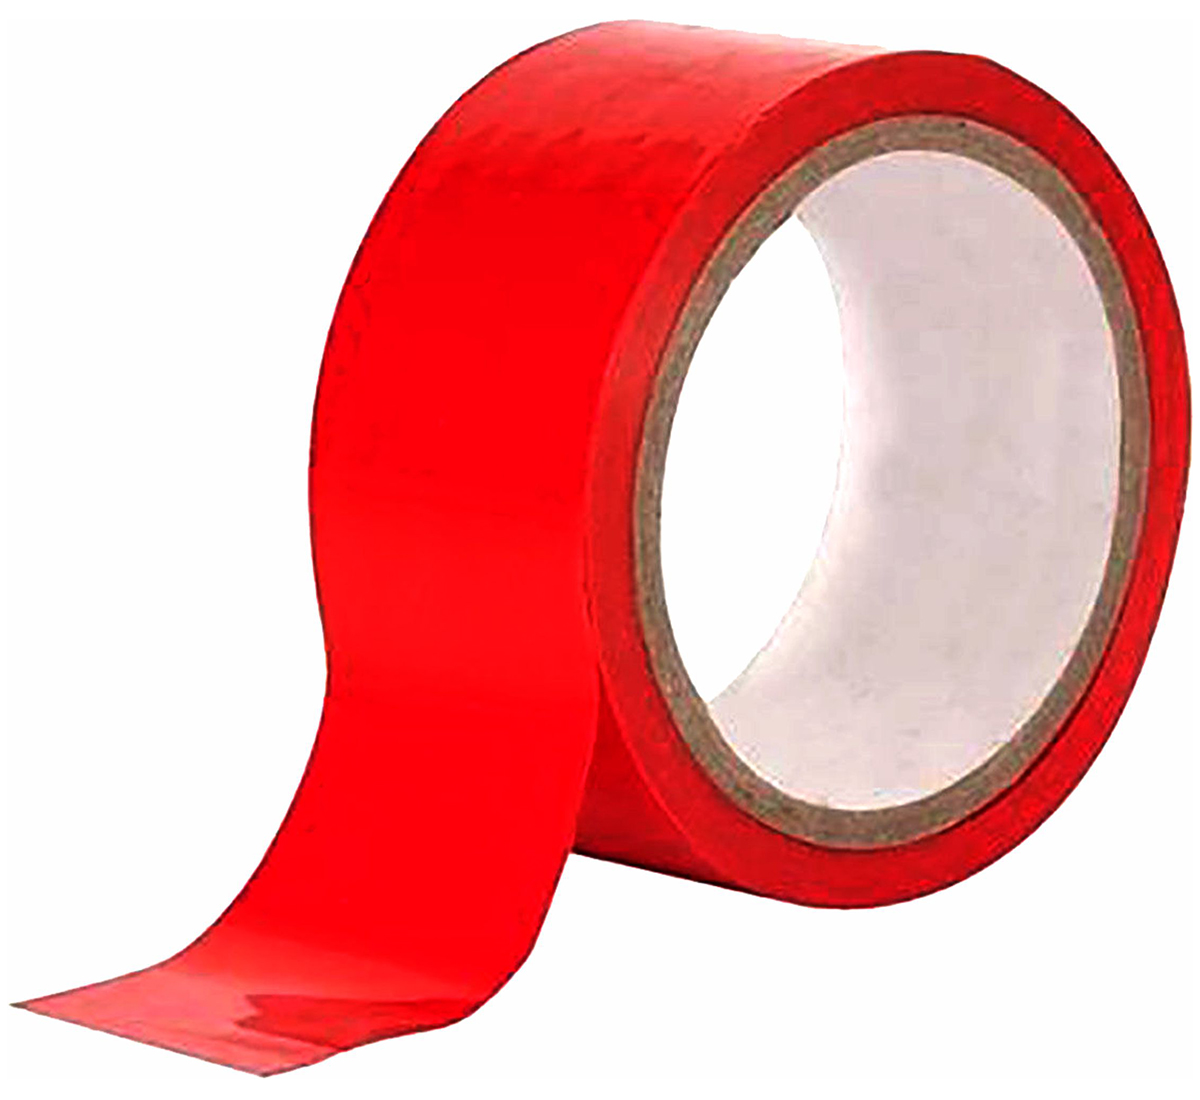 Red floor marking tape for safety